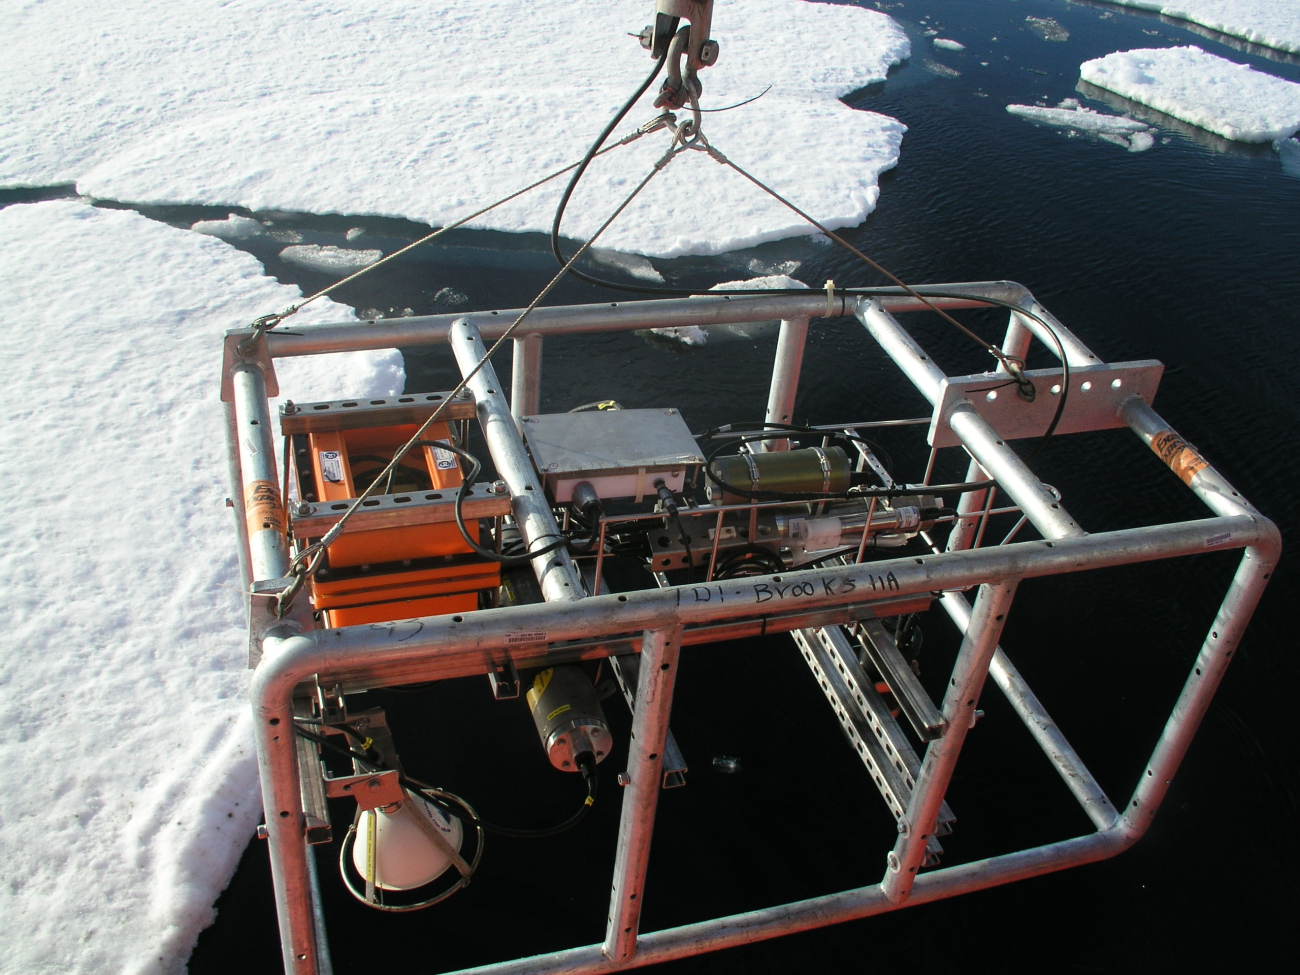 The photoplatform is deployed into icy waters